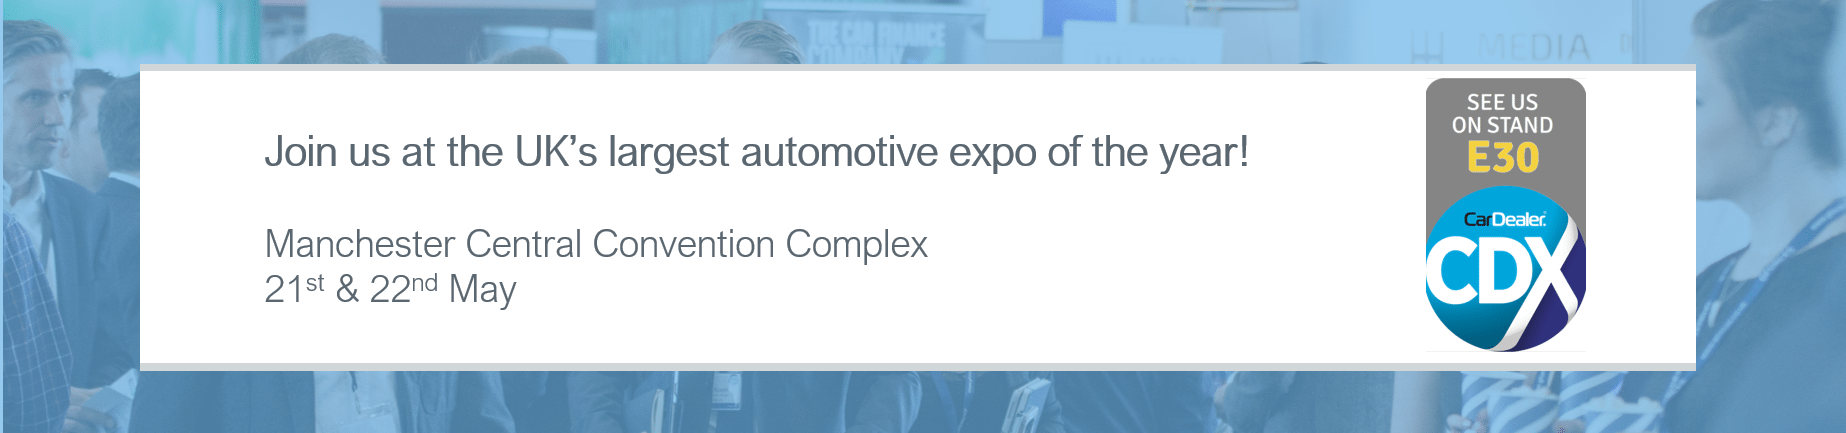 Join us at the UK's largest automotive expo of the year!